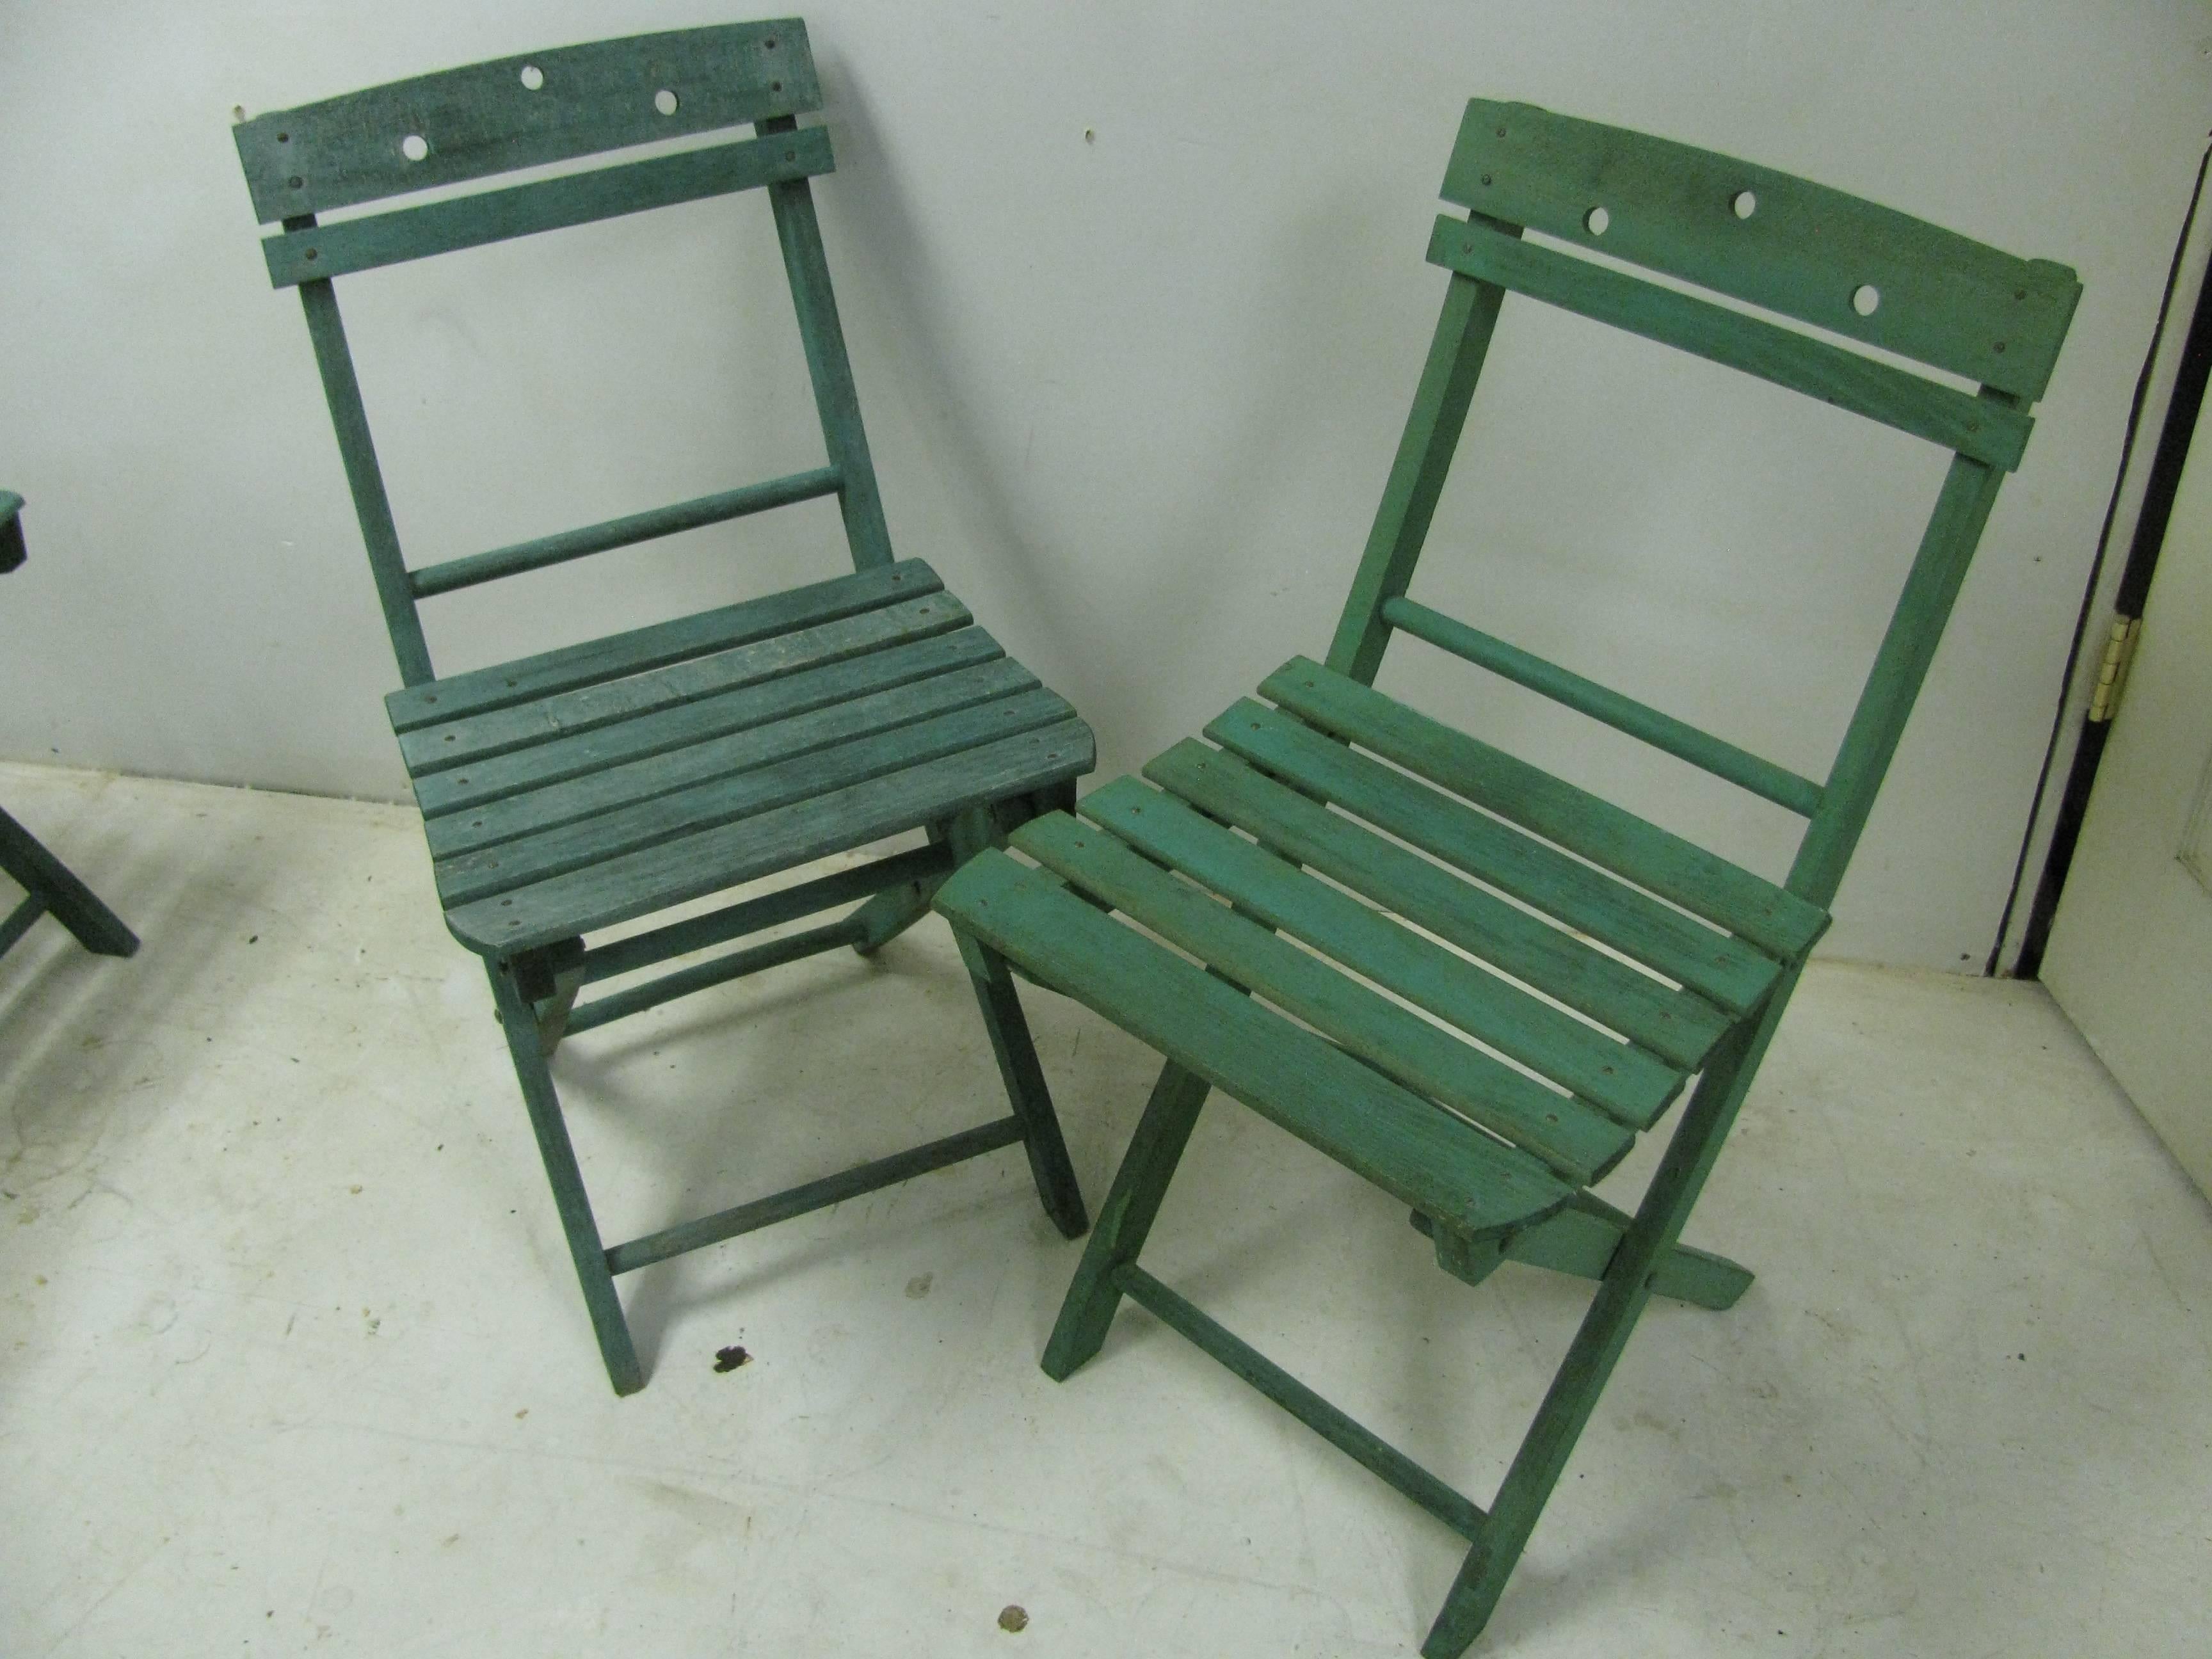 All original set of four all wood foldup cafe chairs, circa 1960. Original green paint, and sturdy in excellent condition, folds easily for storing. Two had sat outside in the sun and weather while two were inside most of their lives.